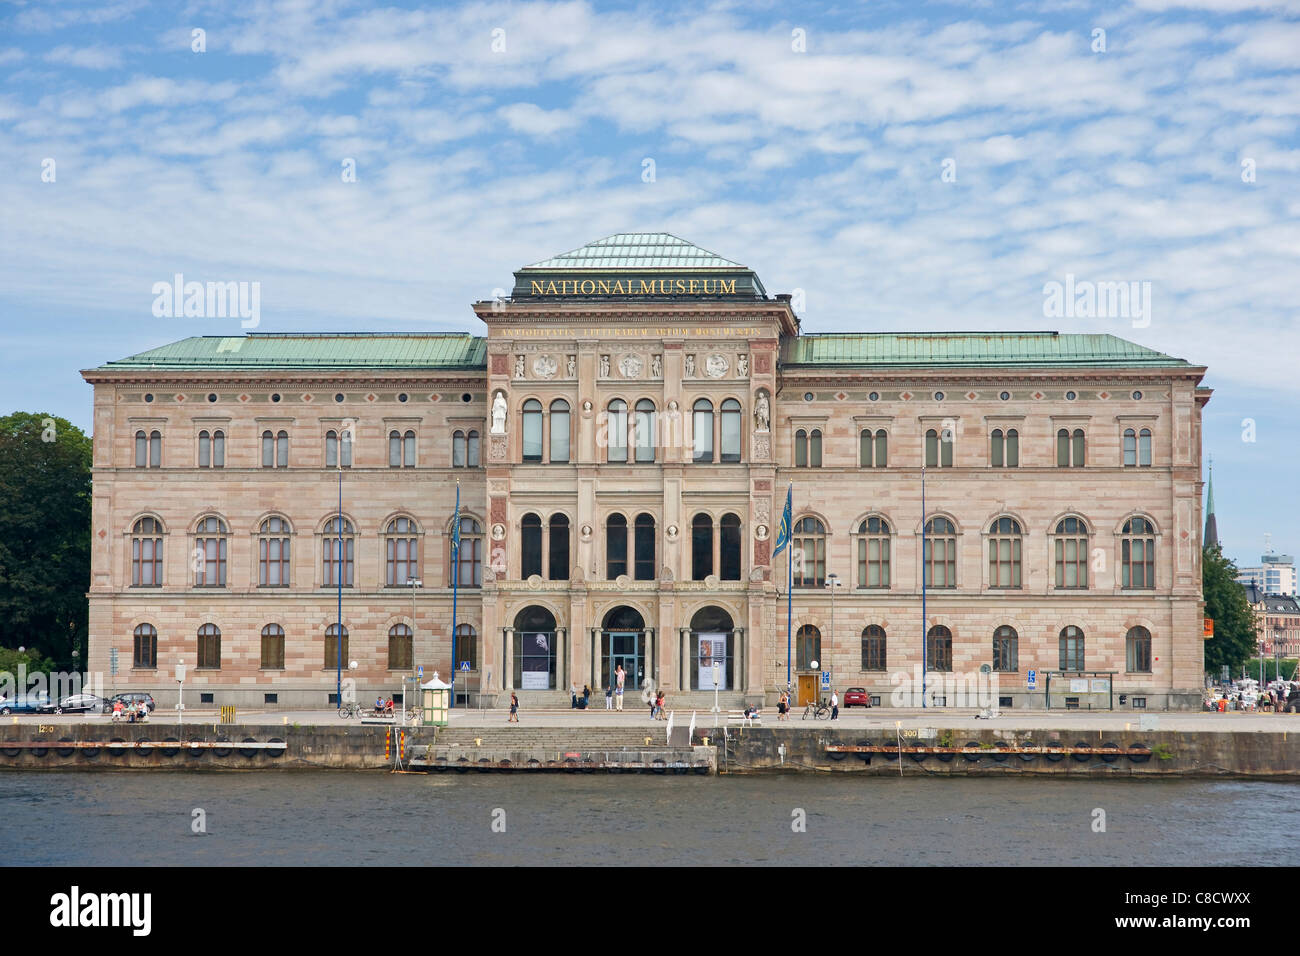 National museum, Stockholm Stock Photo